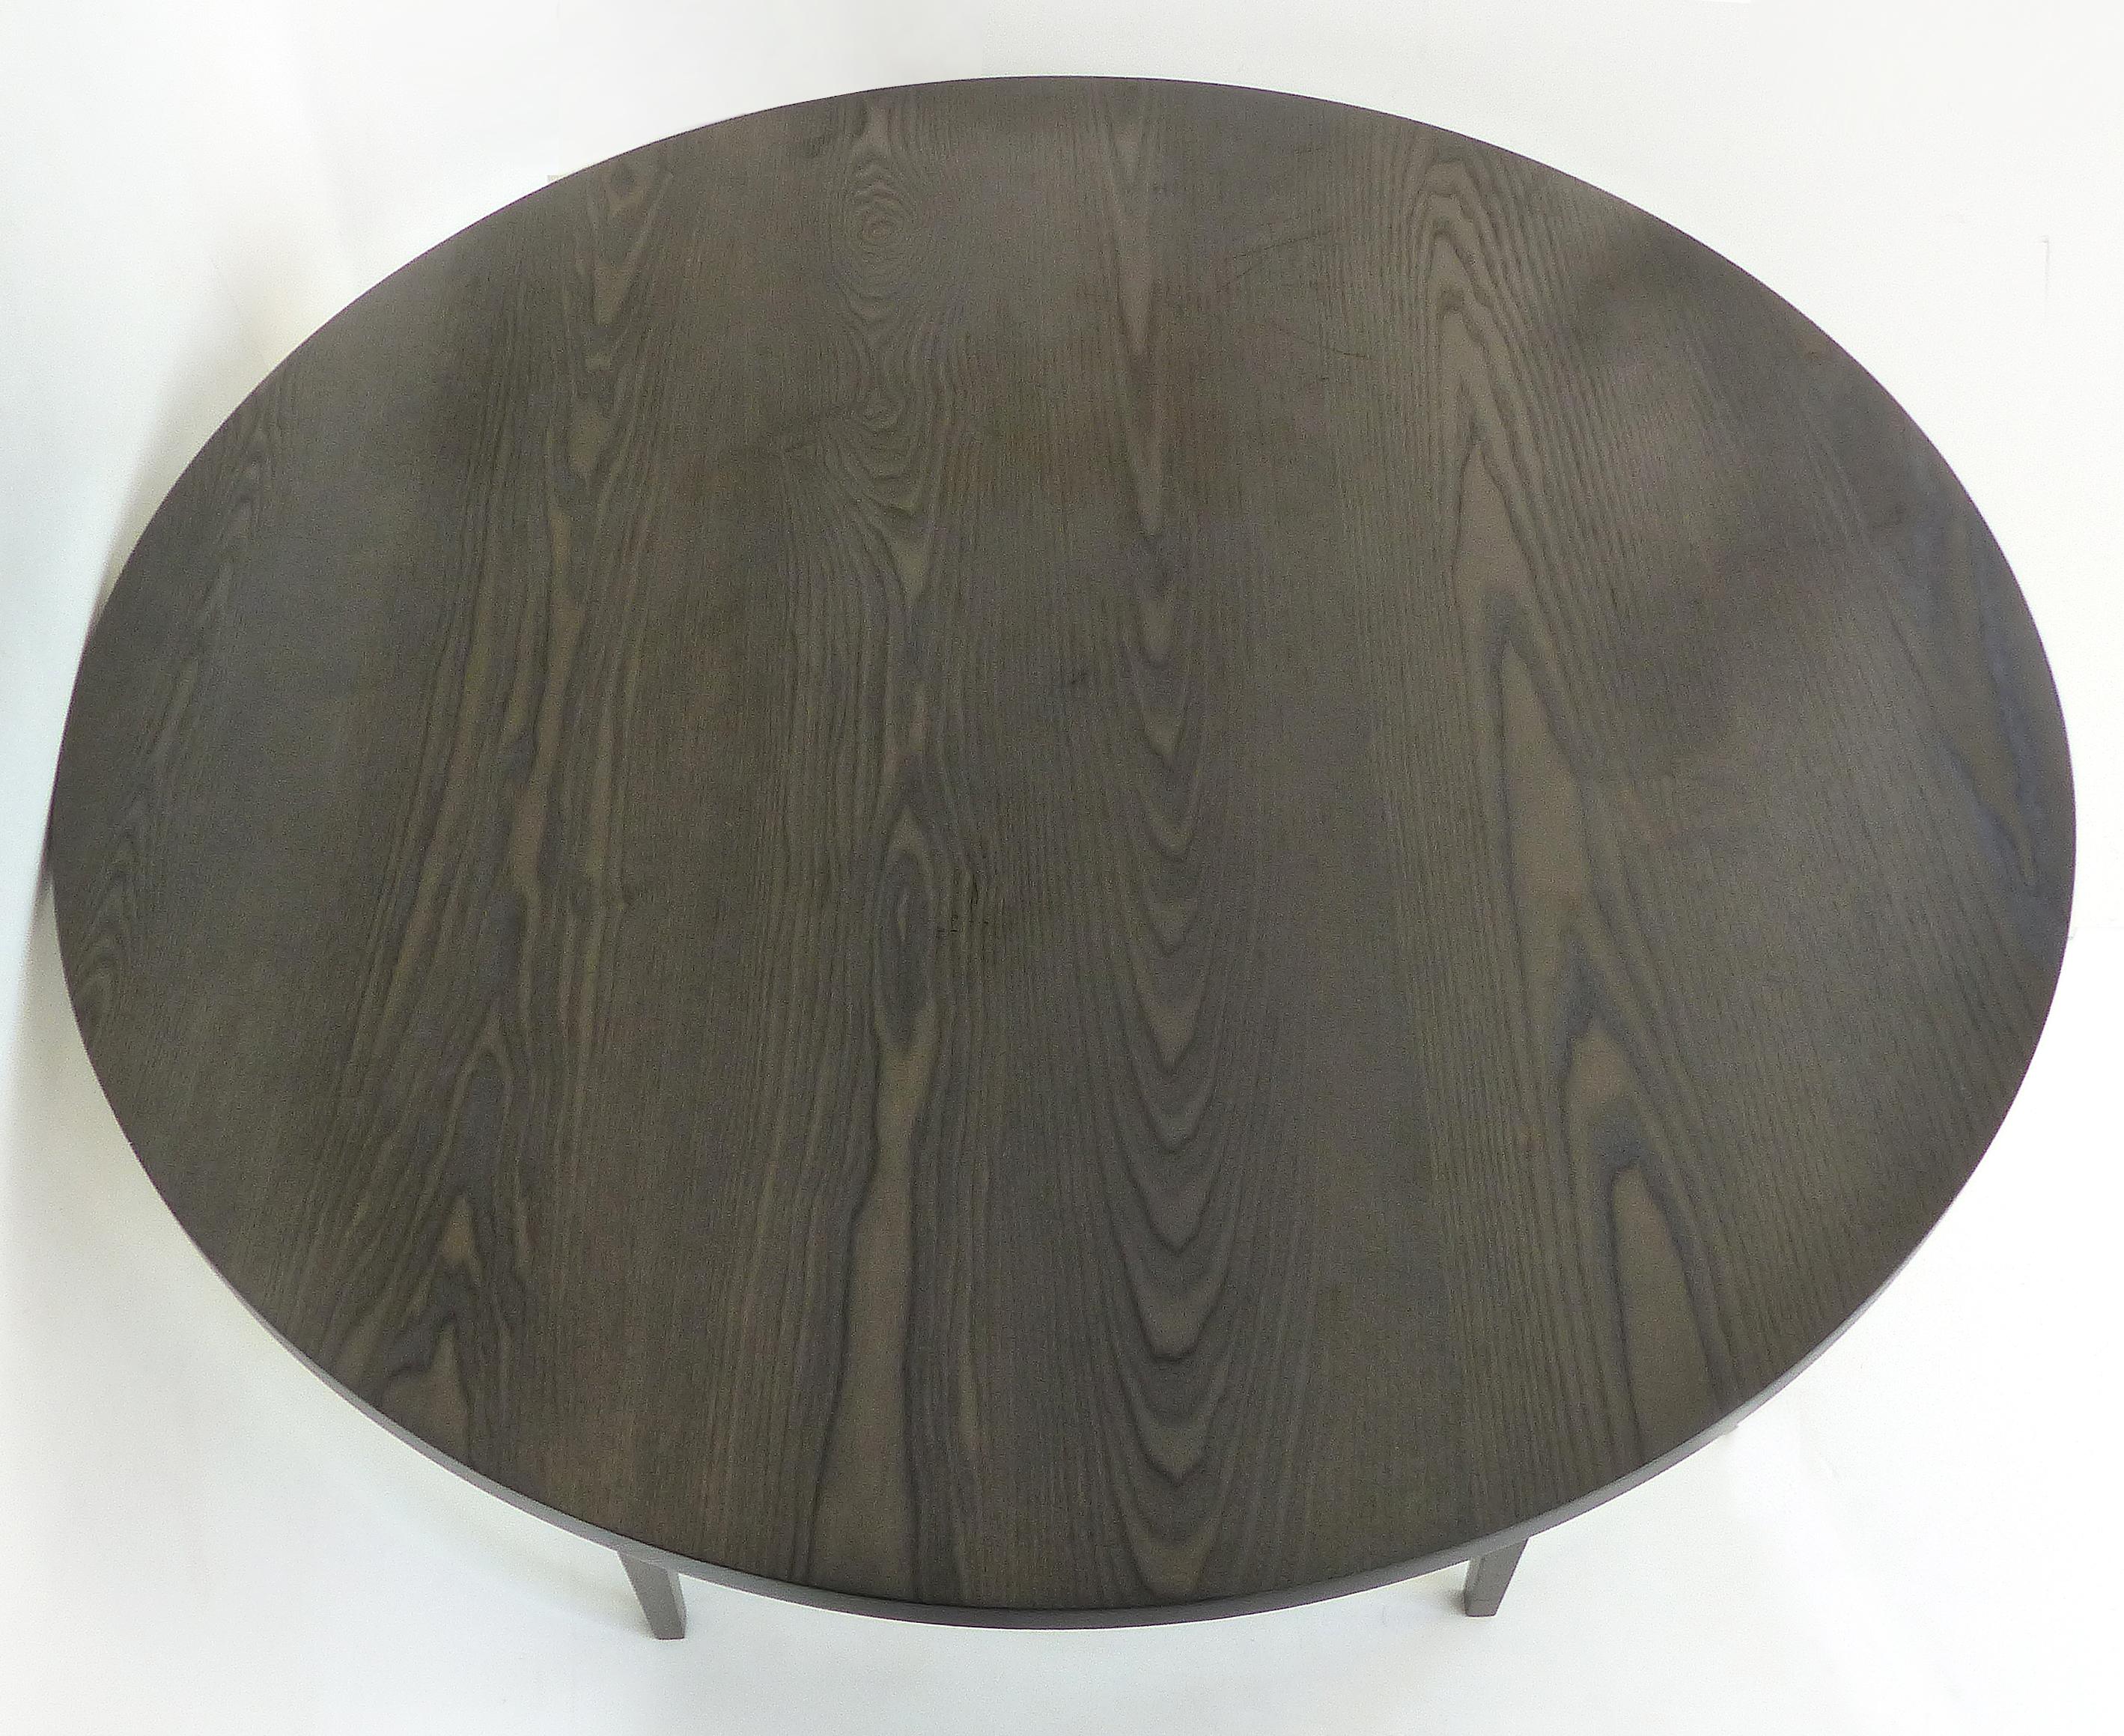 OO & G Studio Warren, Rhode Island cerused oak table in the Shaker style

 Offered for sale is a cerused oak table designed by Jonathan Glatt and Sara Ossana, founders of O&G Studio which designs and manufactures furniture honoring American design